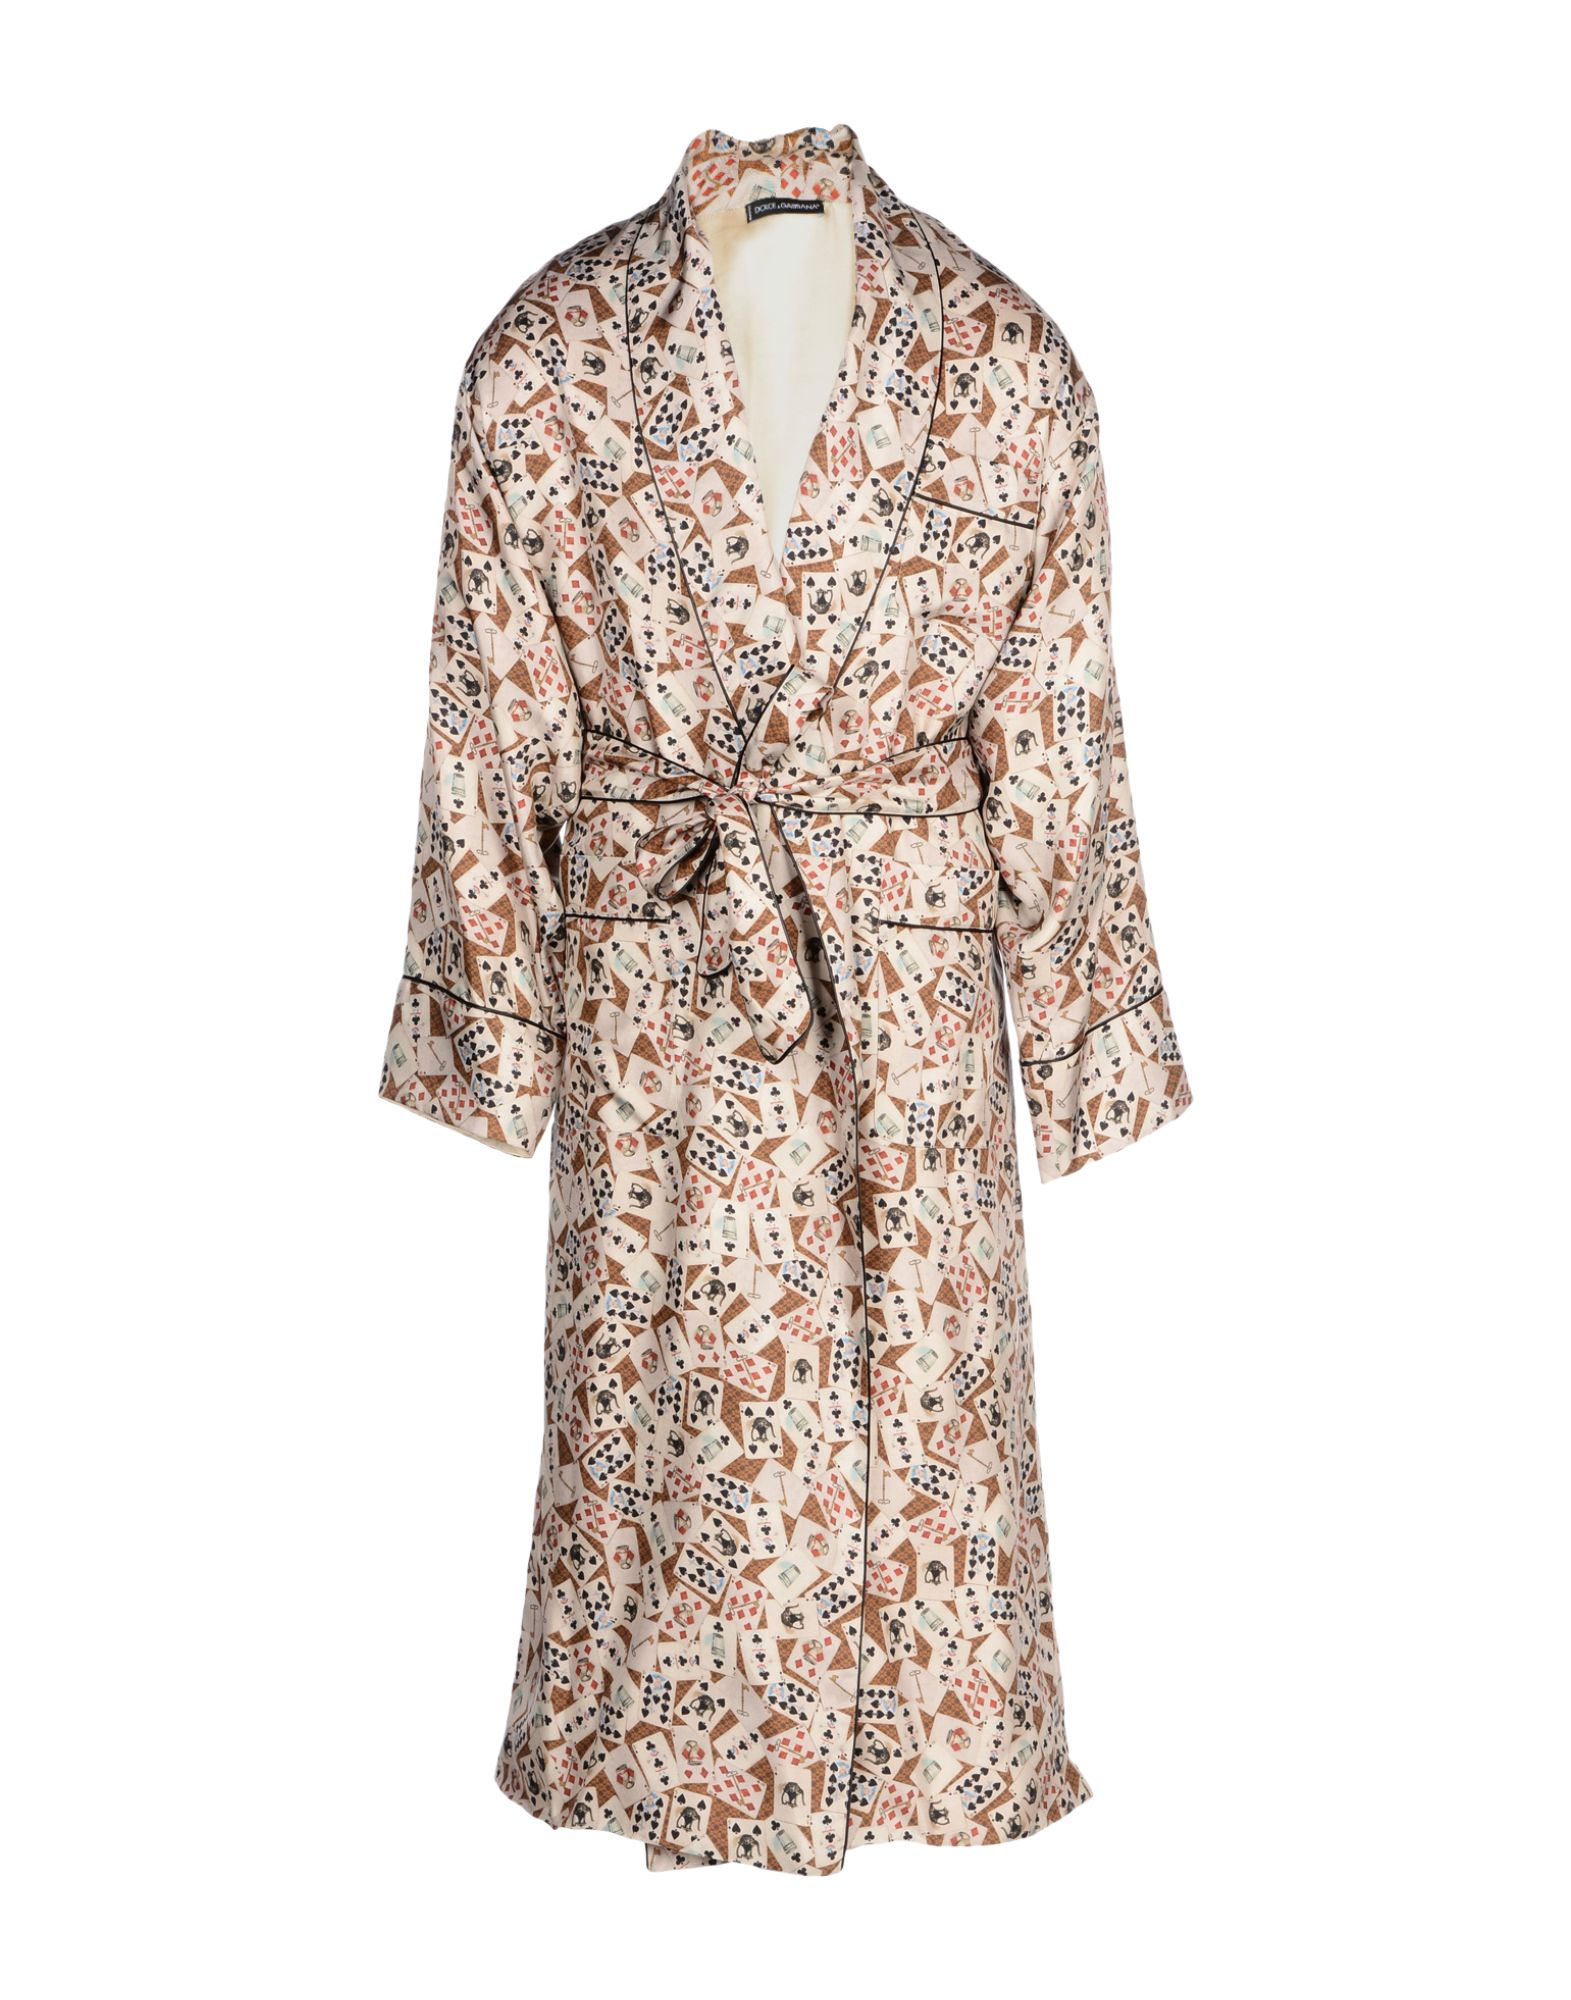 dolce and gabbana dressing gown